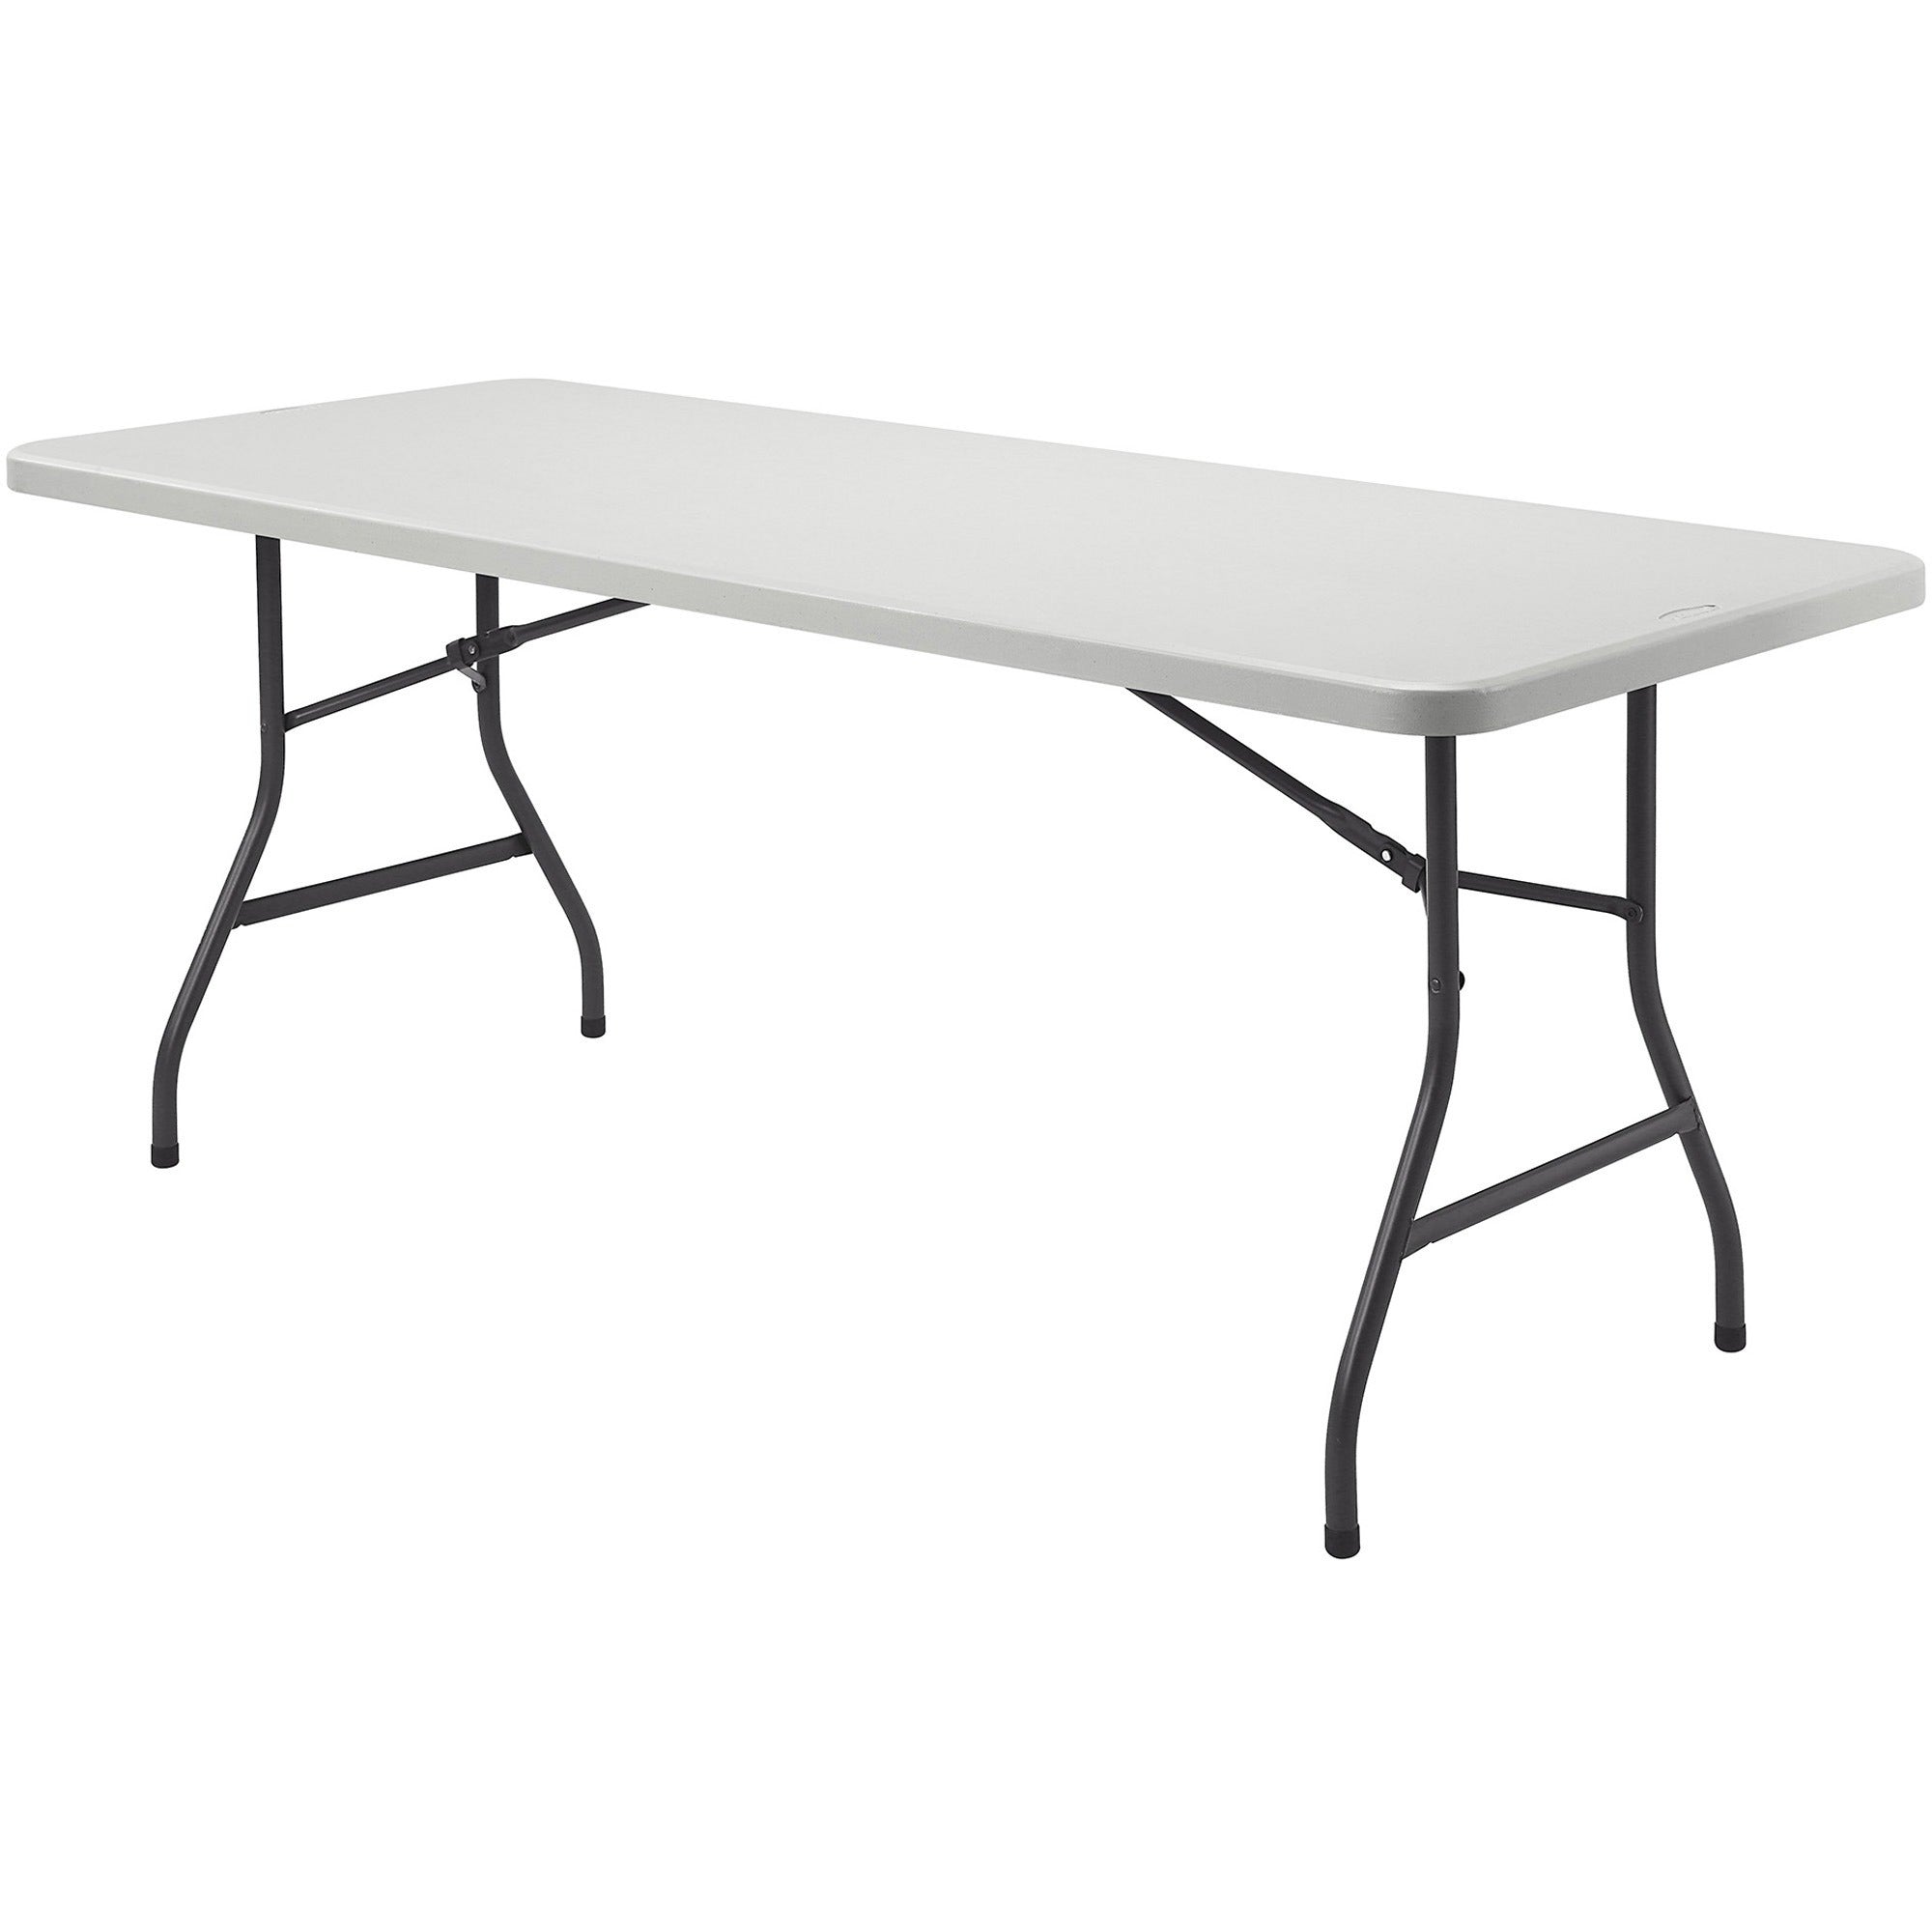 lorell-ultra-lite-banquet-table-for-table-toplight-gray-rectangle-top-dark-gray-folding-base-600-lb-capacity-x-60-table-top-width-x-30-table-top-depth-x-2-table-top-thickness-29-height-gray-1-each_llr66656 - 1